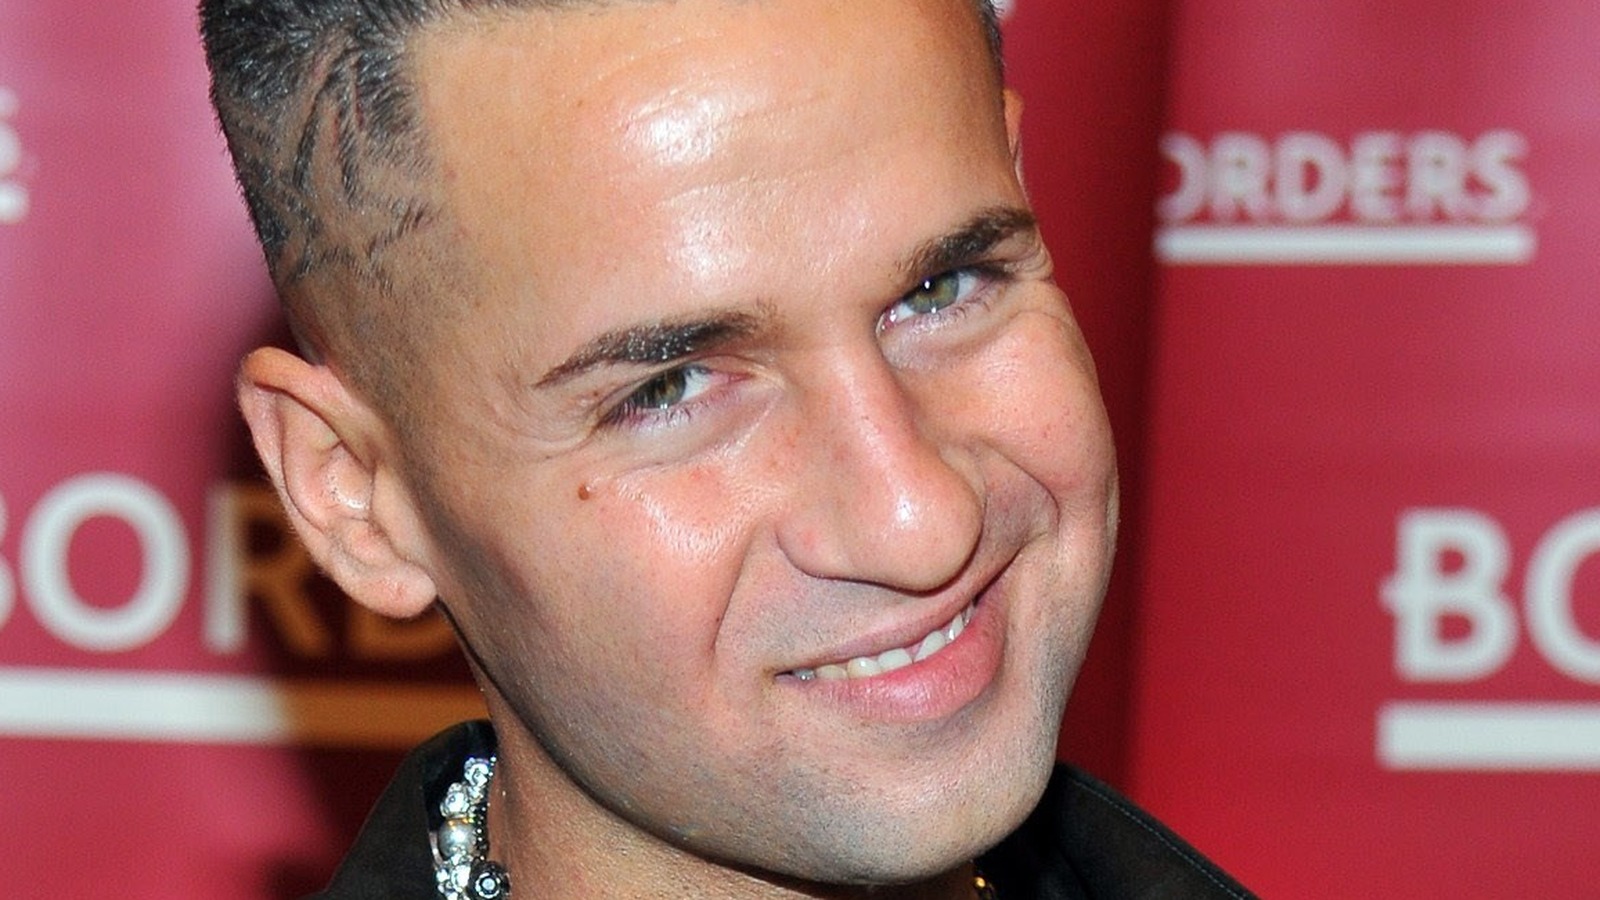 How Much Is Mike 'The Situation' Sorrentino From Jersey Shore Worth?